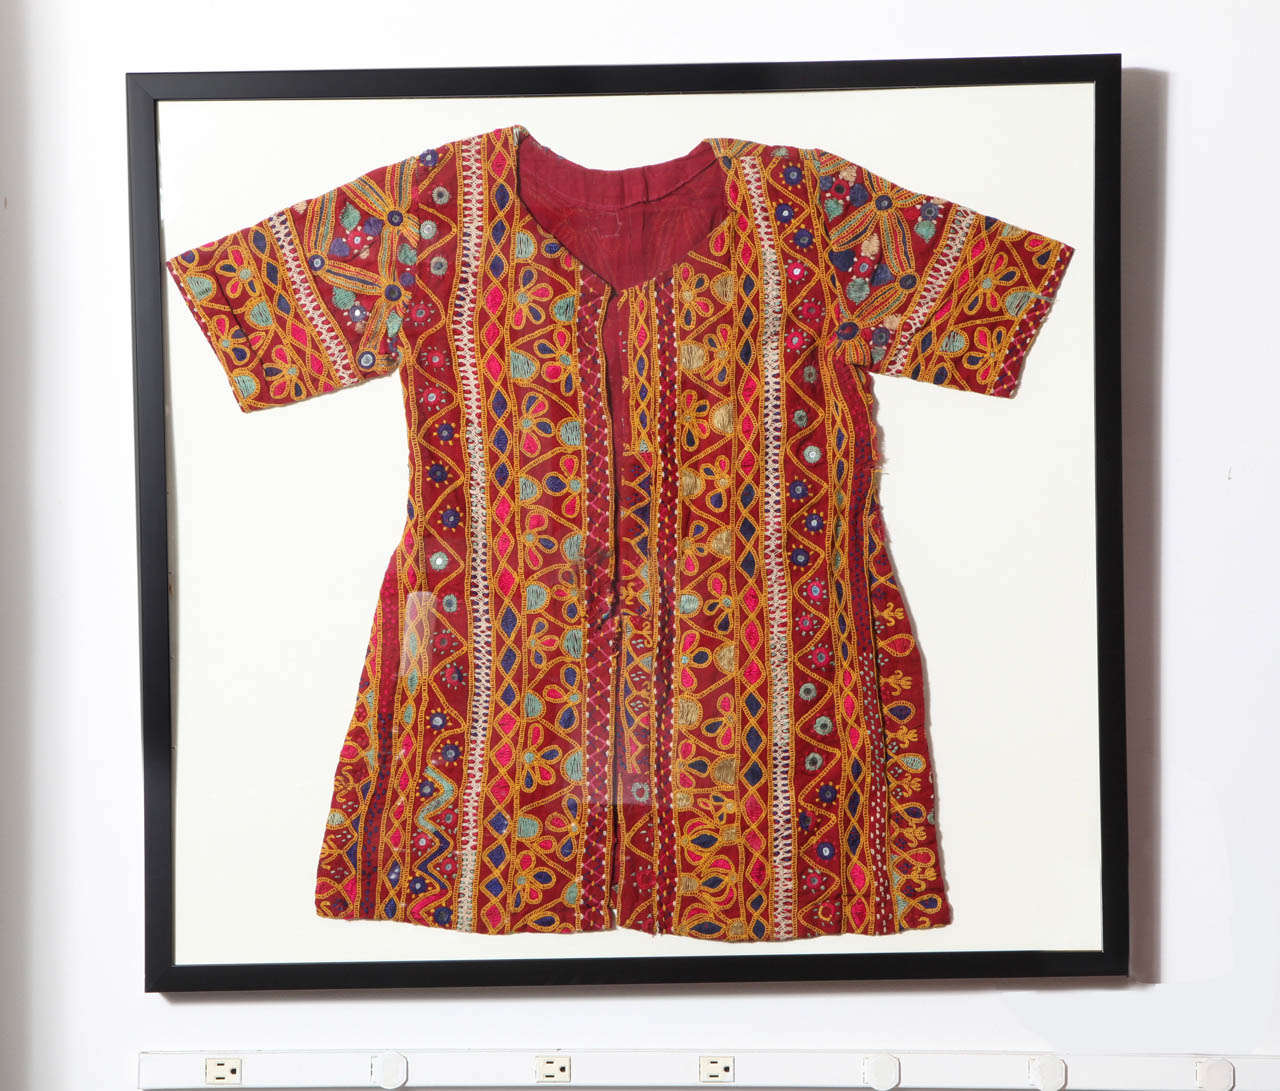 A hand-embroidered ceremonial dress from India, framed. Other similar items available.